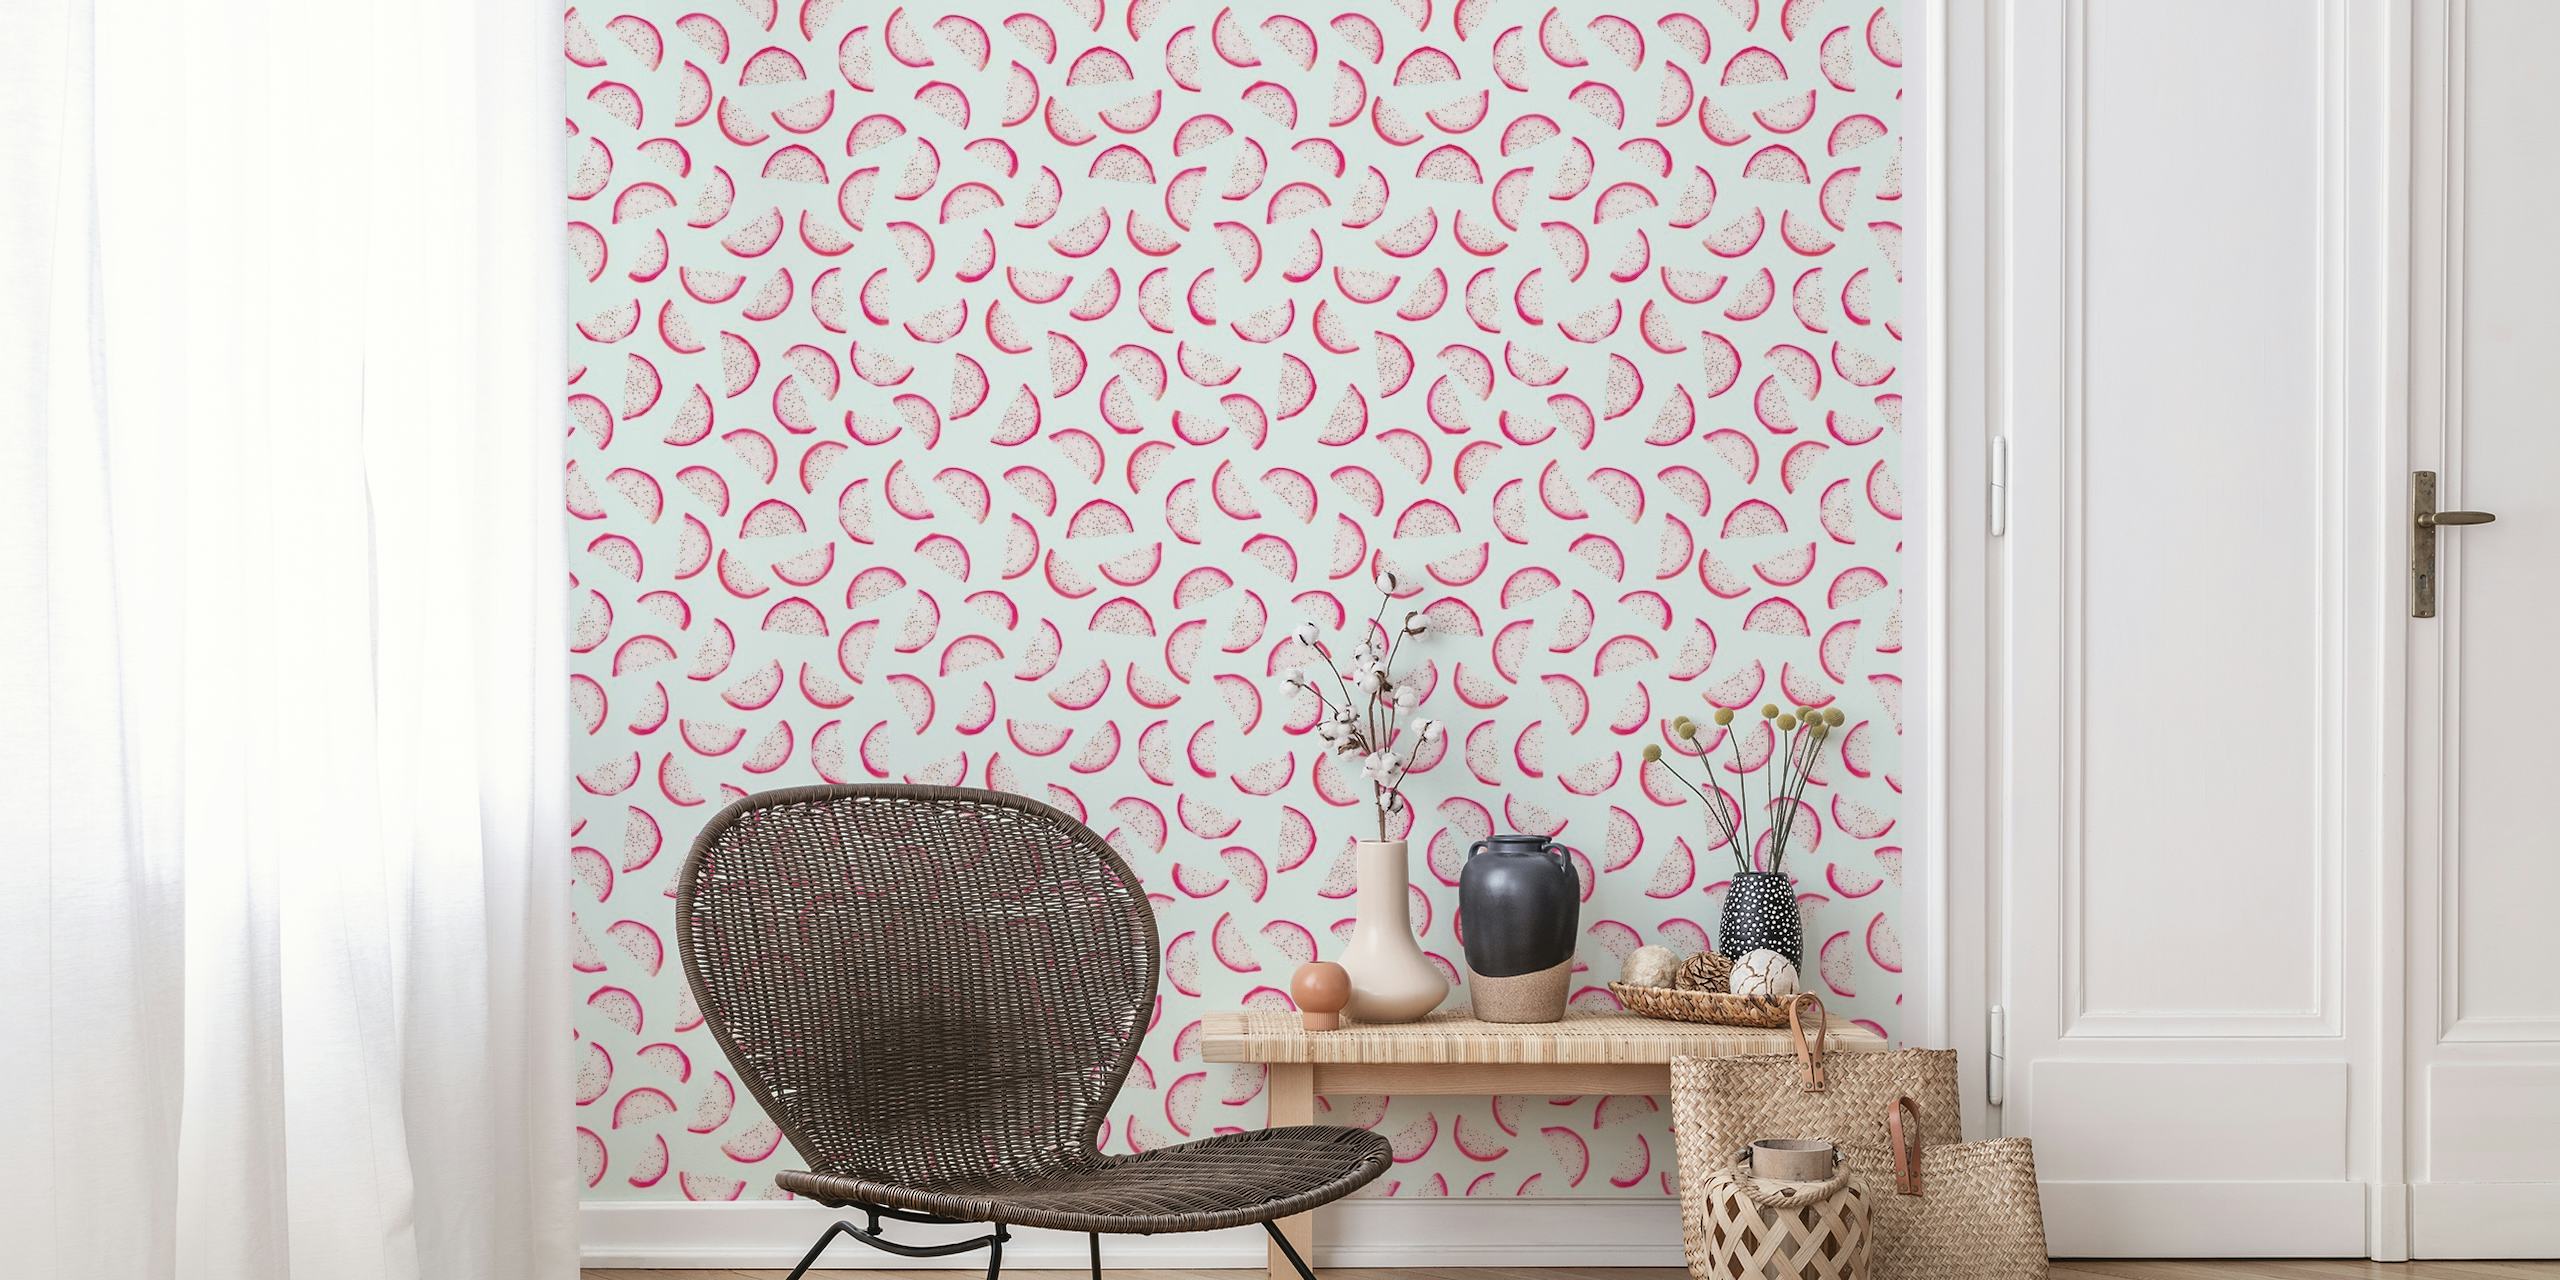 Abstract dragonfruit pattern wall mural with soft pink curves on white background